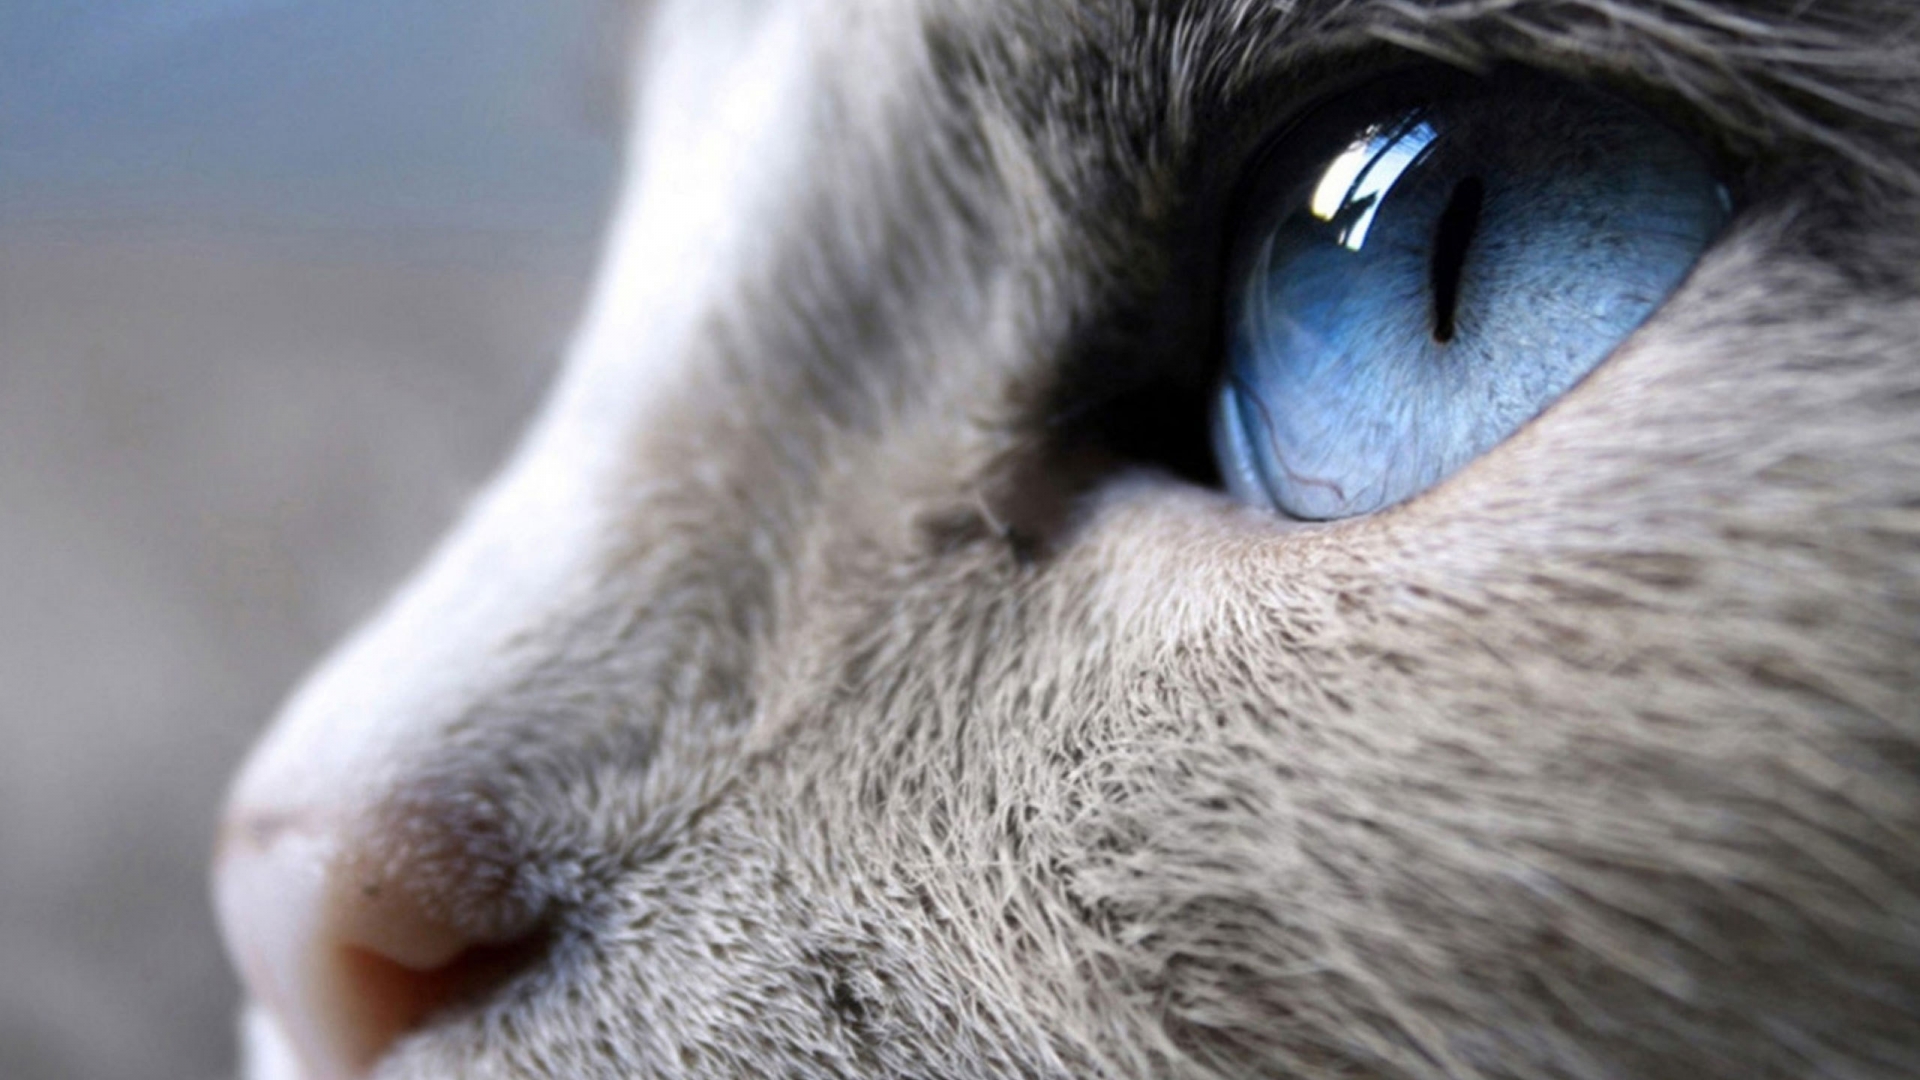 Incredible Siamese Cat Profile Look for 1920 x 1080 HDTV 1080p resolution